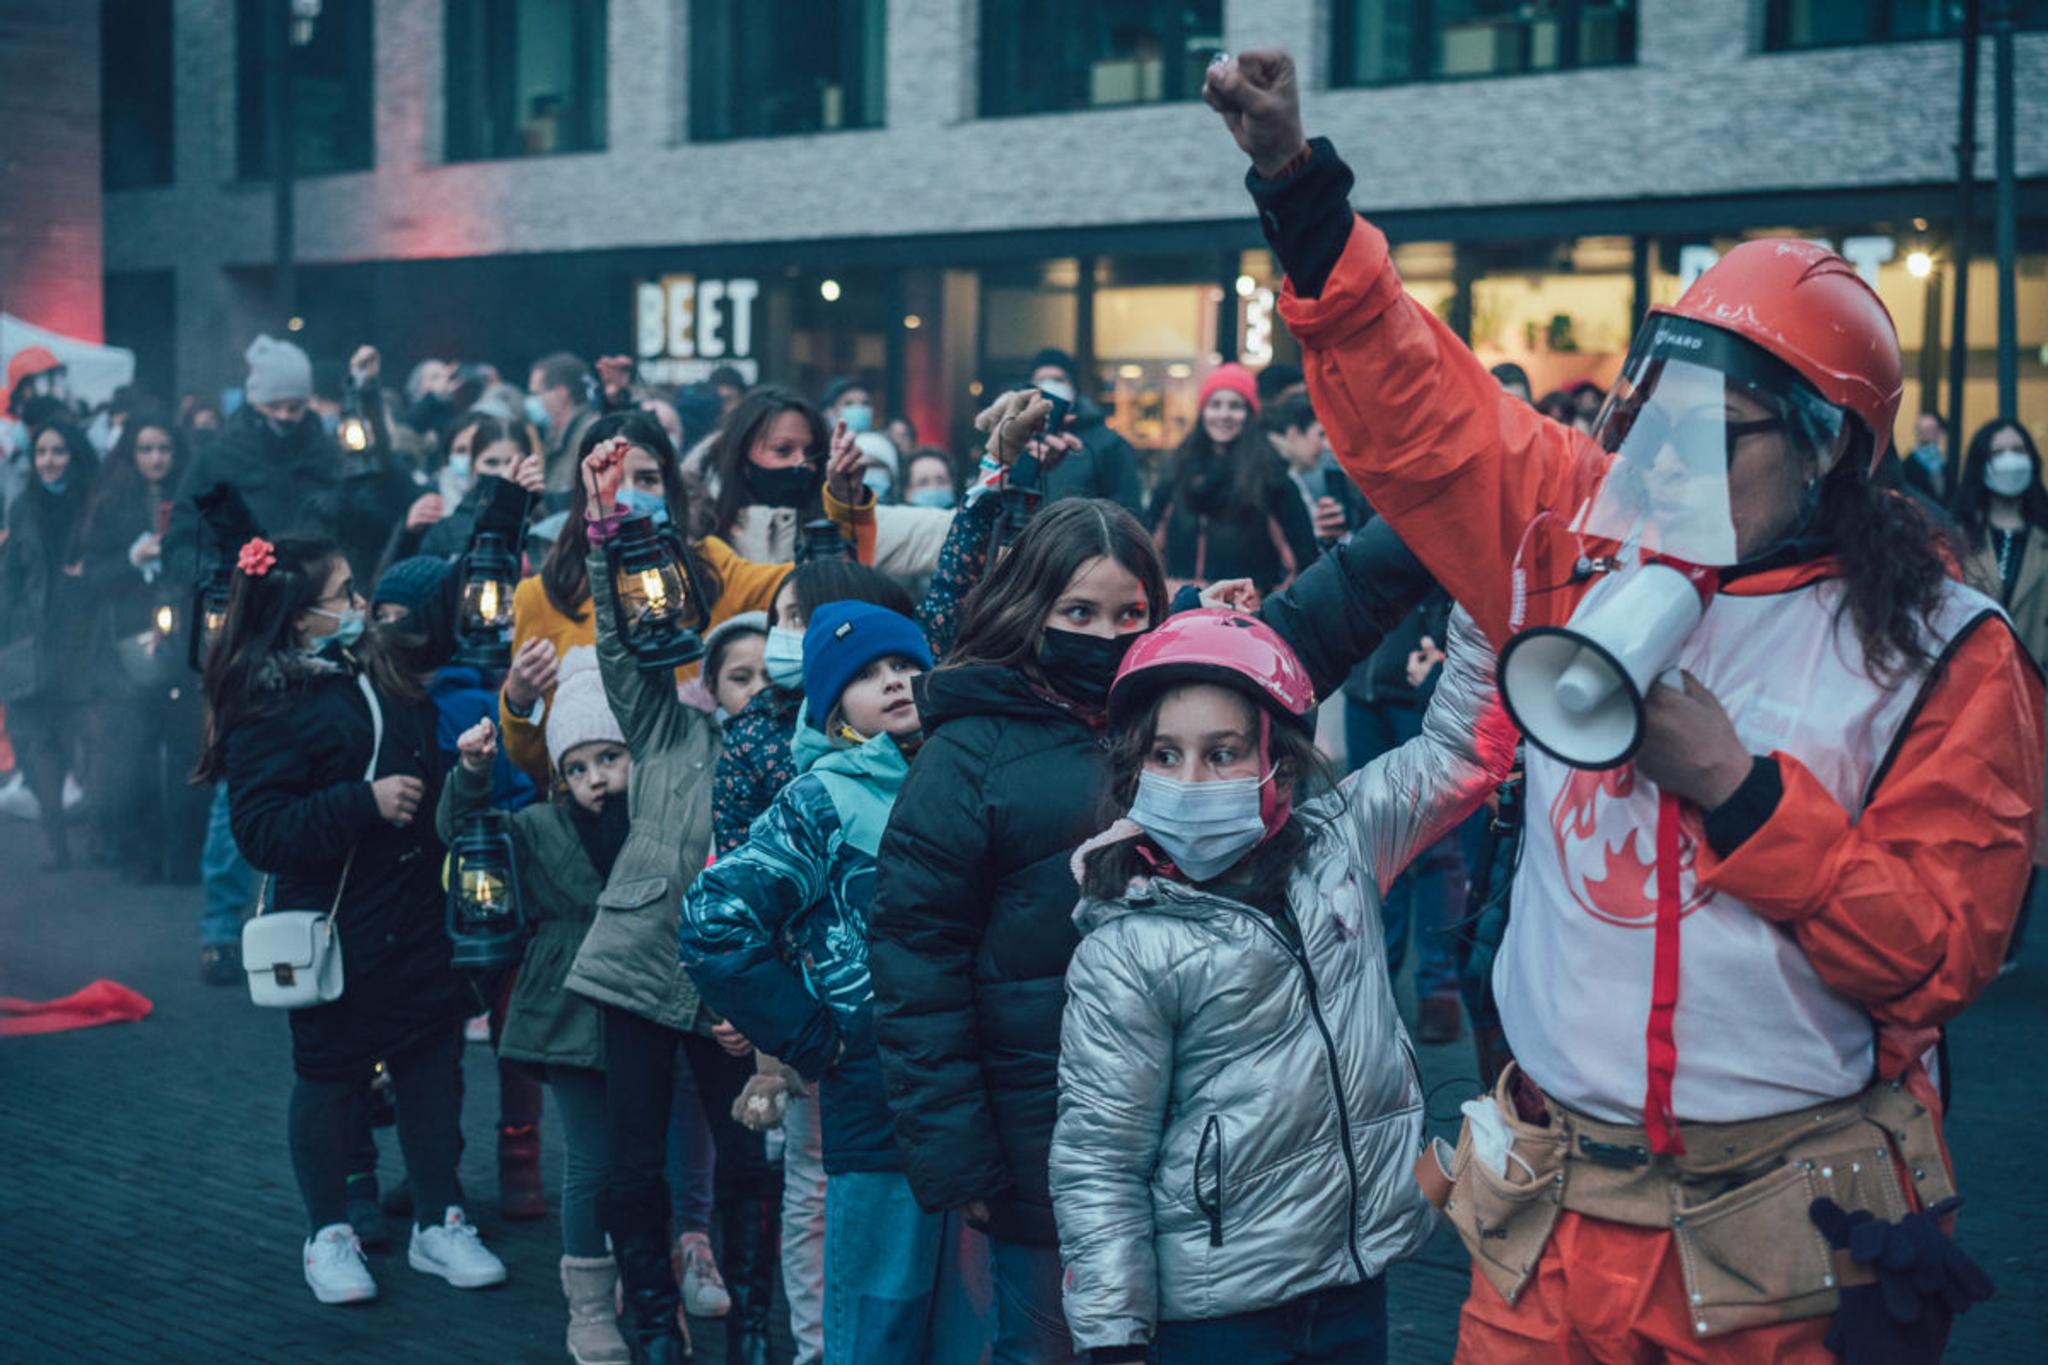 A woman in an orange jumpsuit and a white vest with a fire symbol on it has her fist in the air and is speaking into a megaphone. Children line up behind her, some wearing masks. They are outside a brown brick building in what looks like a plaza.